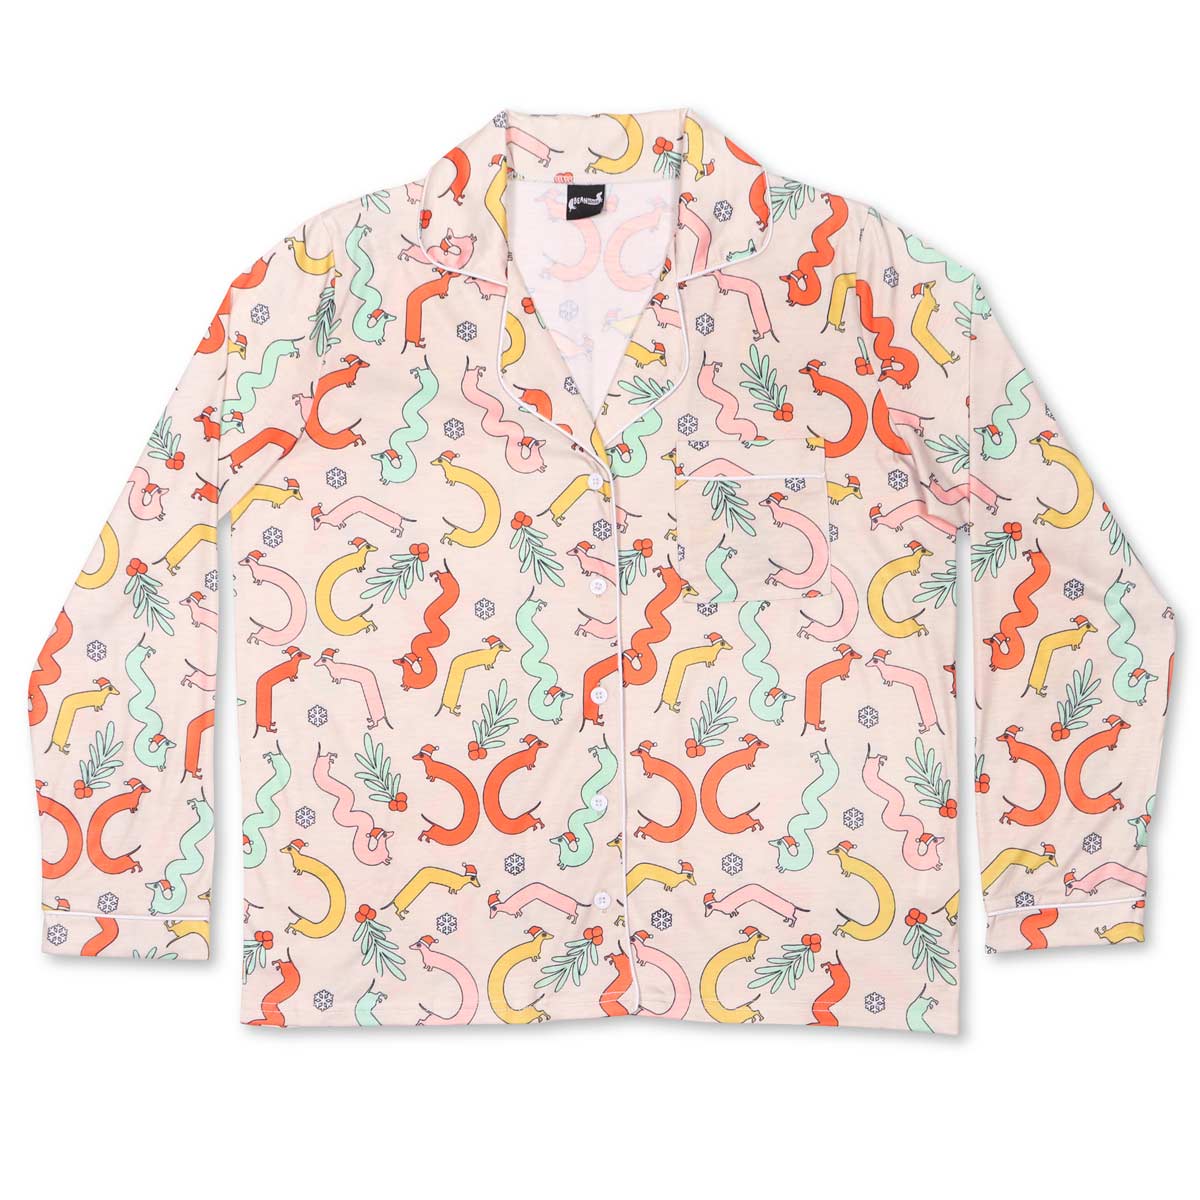 dox-mas squiggly ween button-up long sleeve pajama shirt - bean goods